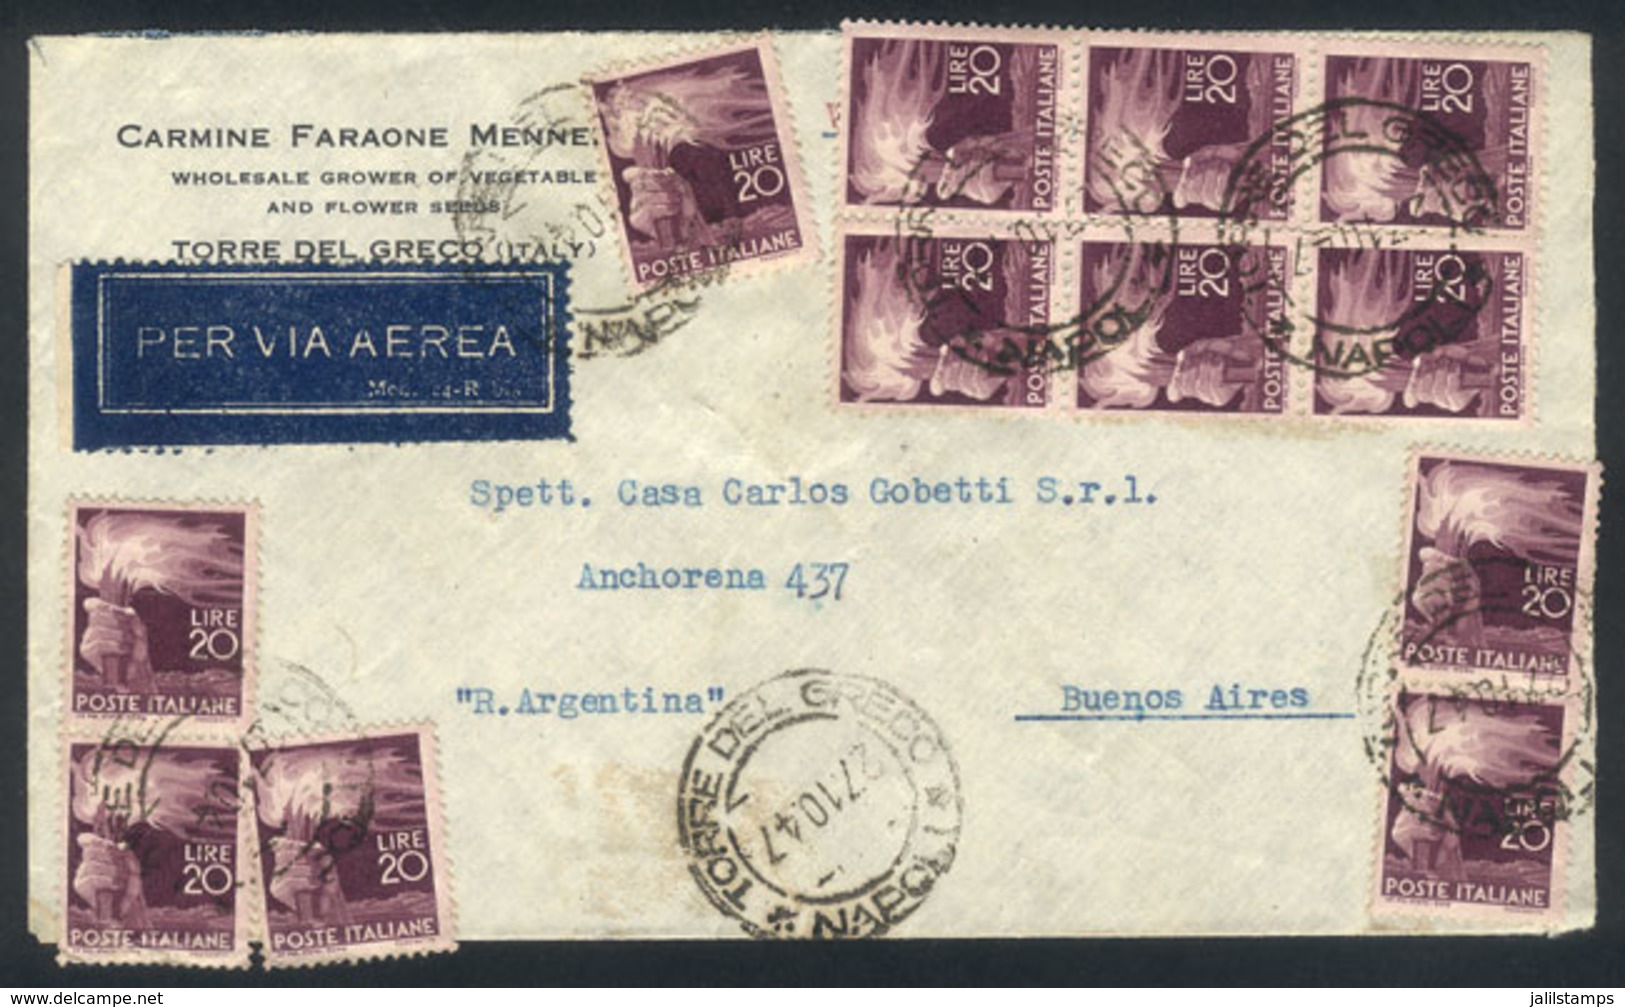 ITALY: 27/OC/1947 TORRE DEL GRECO - Argentina: Airmail Cover Franked With 240 Lire (20L. Democratica X12!!), Fantastic A - Unclassified